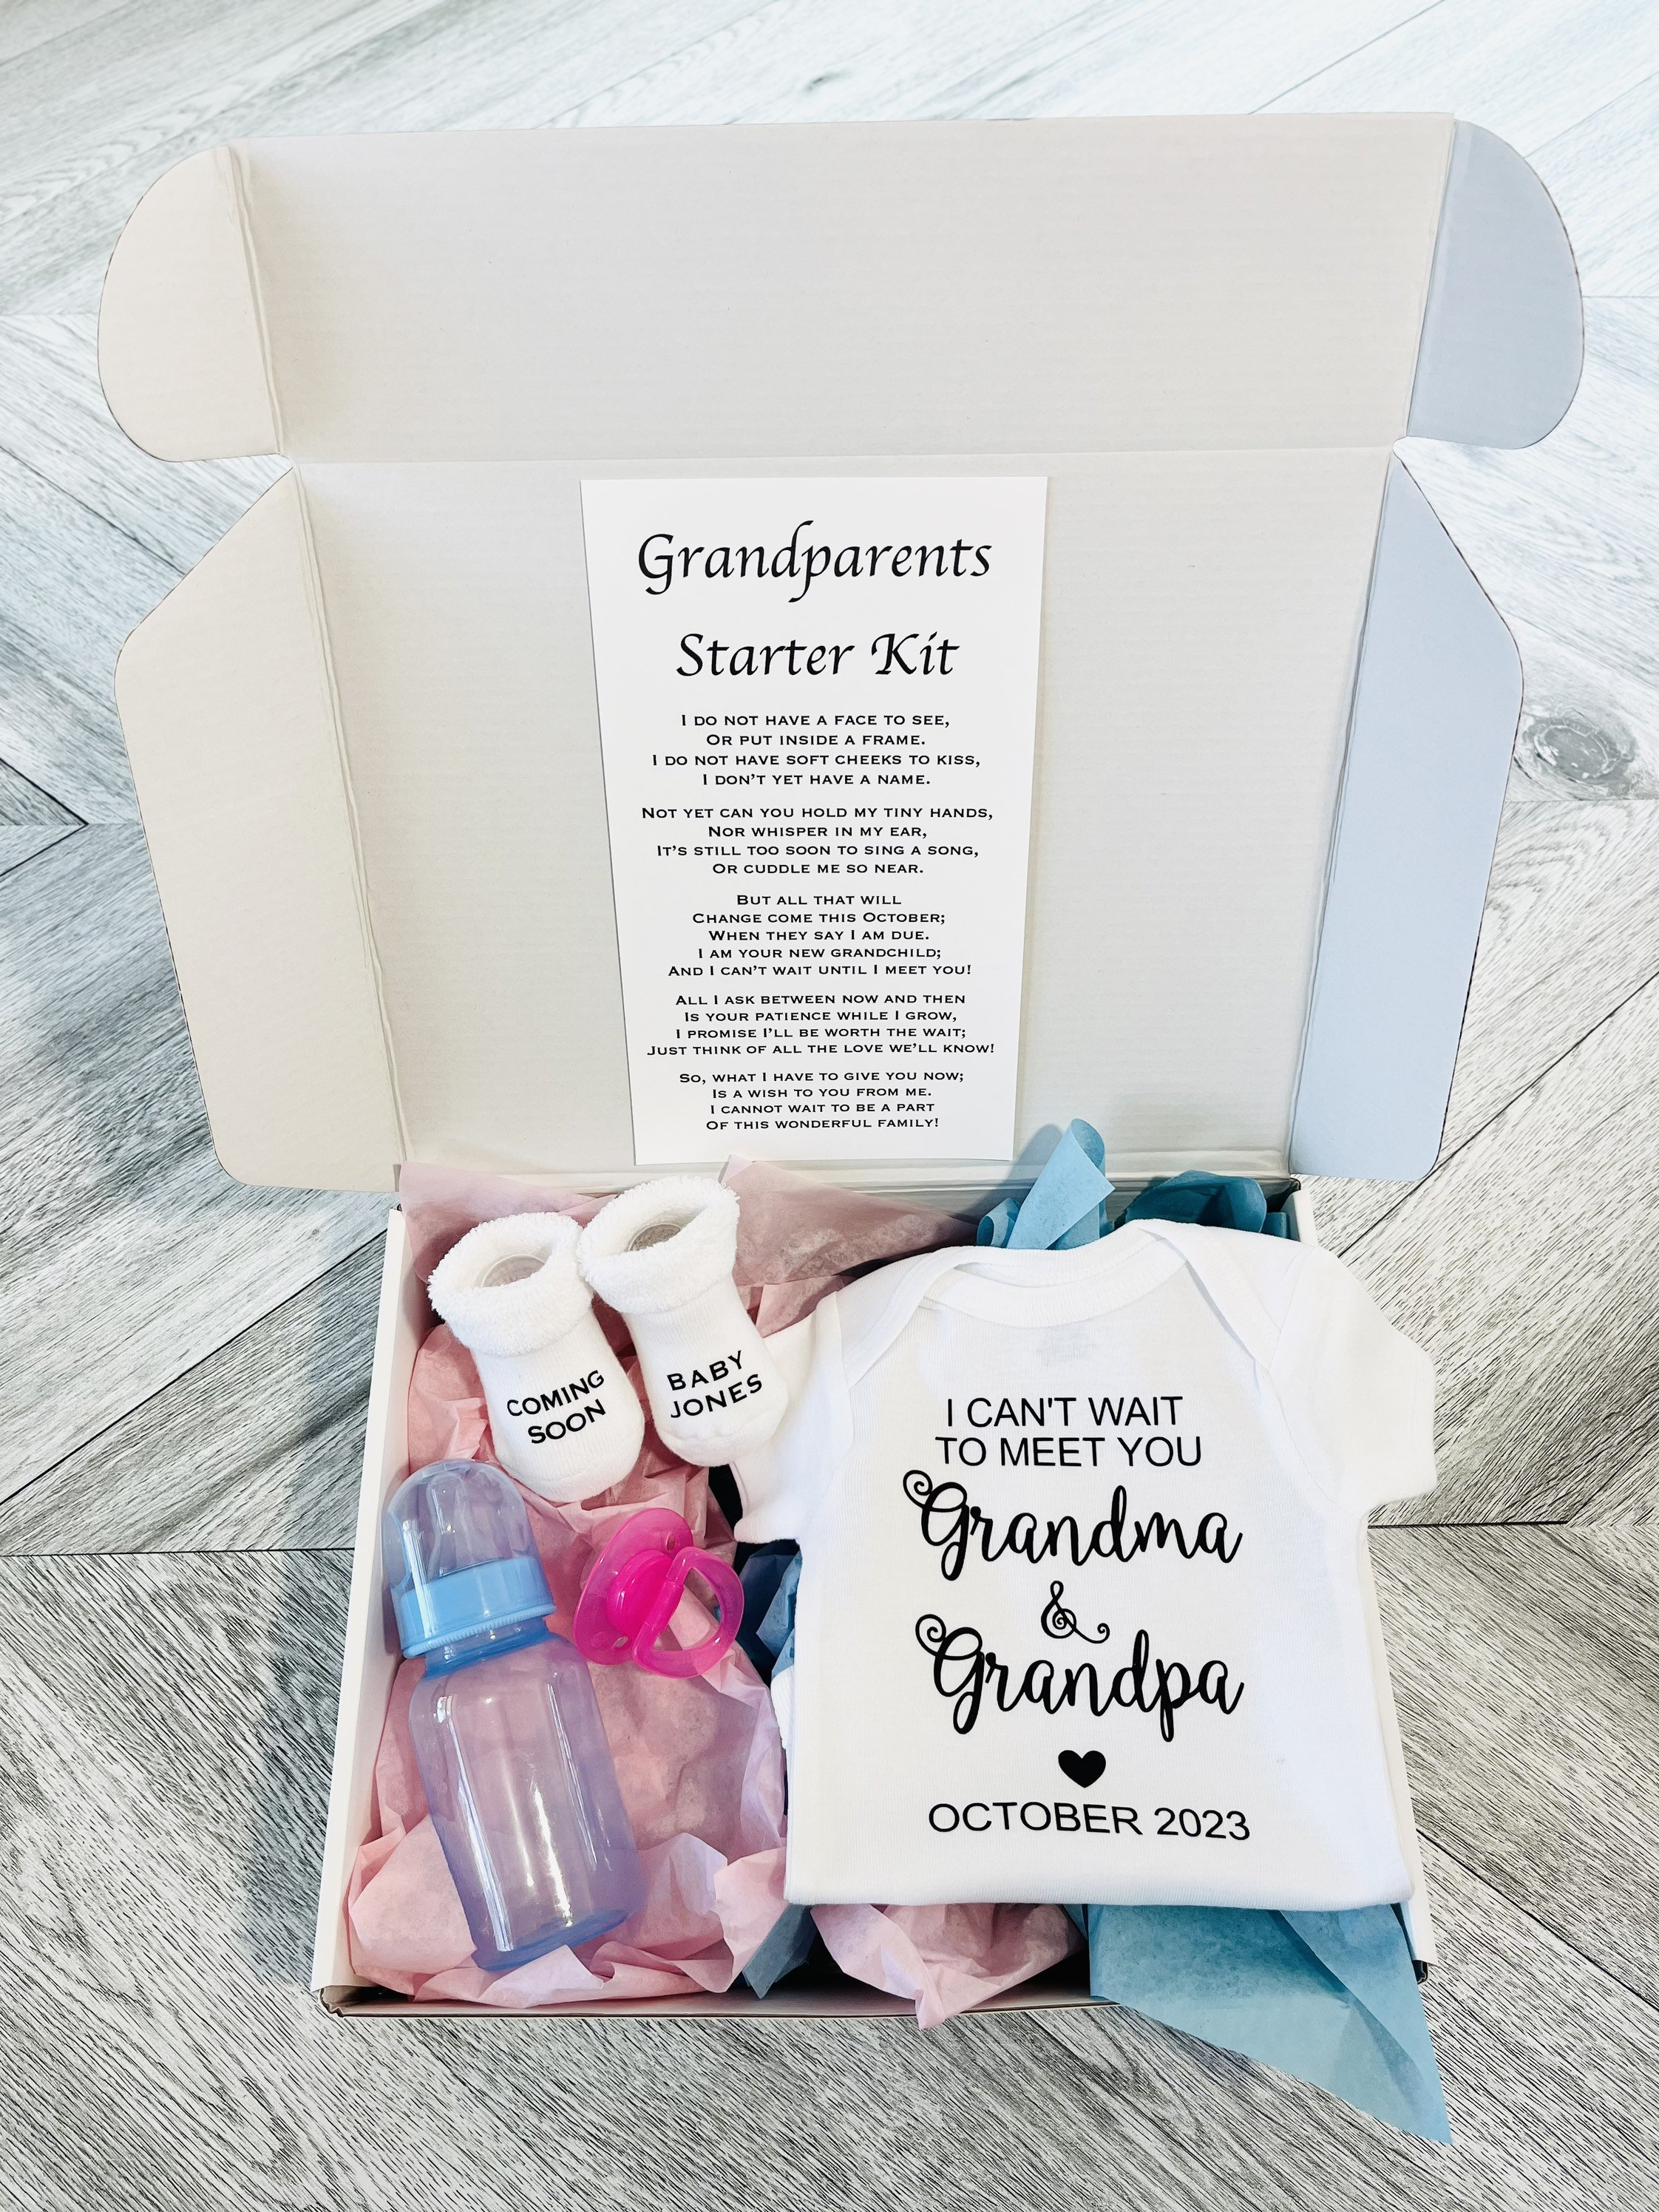 Grand Parents Starter Kit Baby Announcement Pregnancy image photo